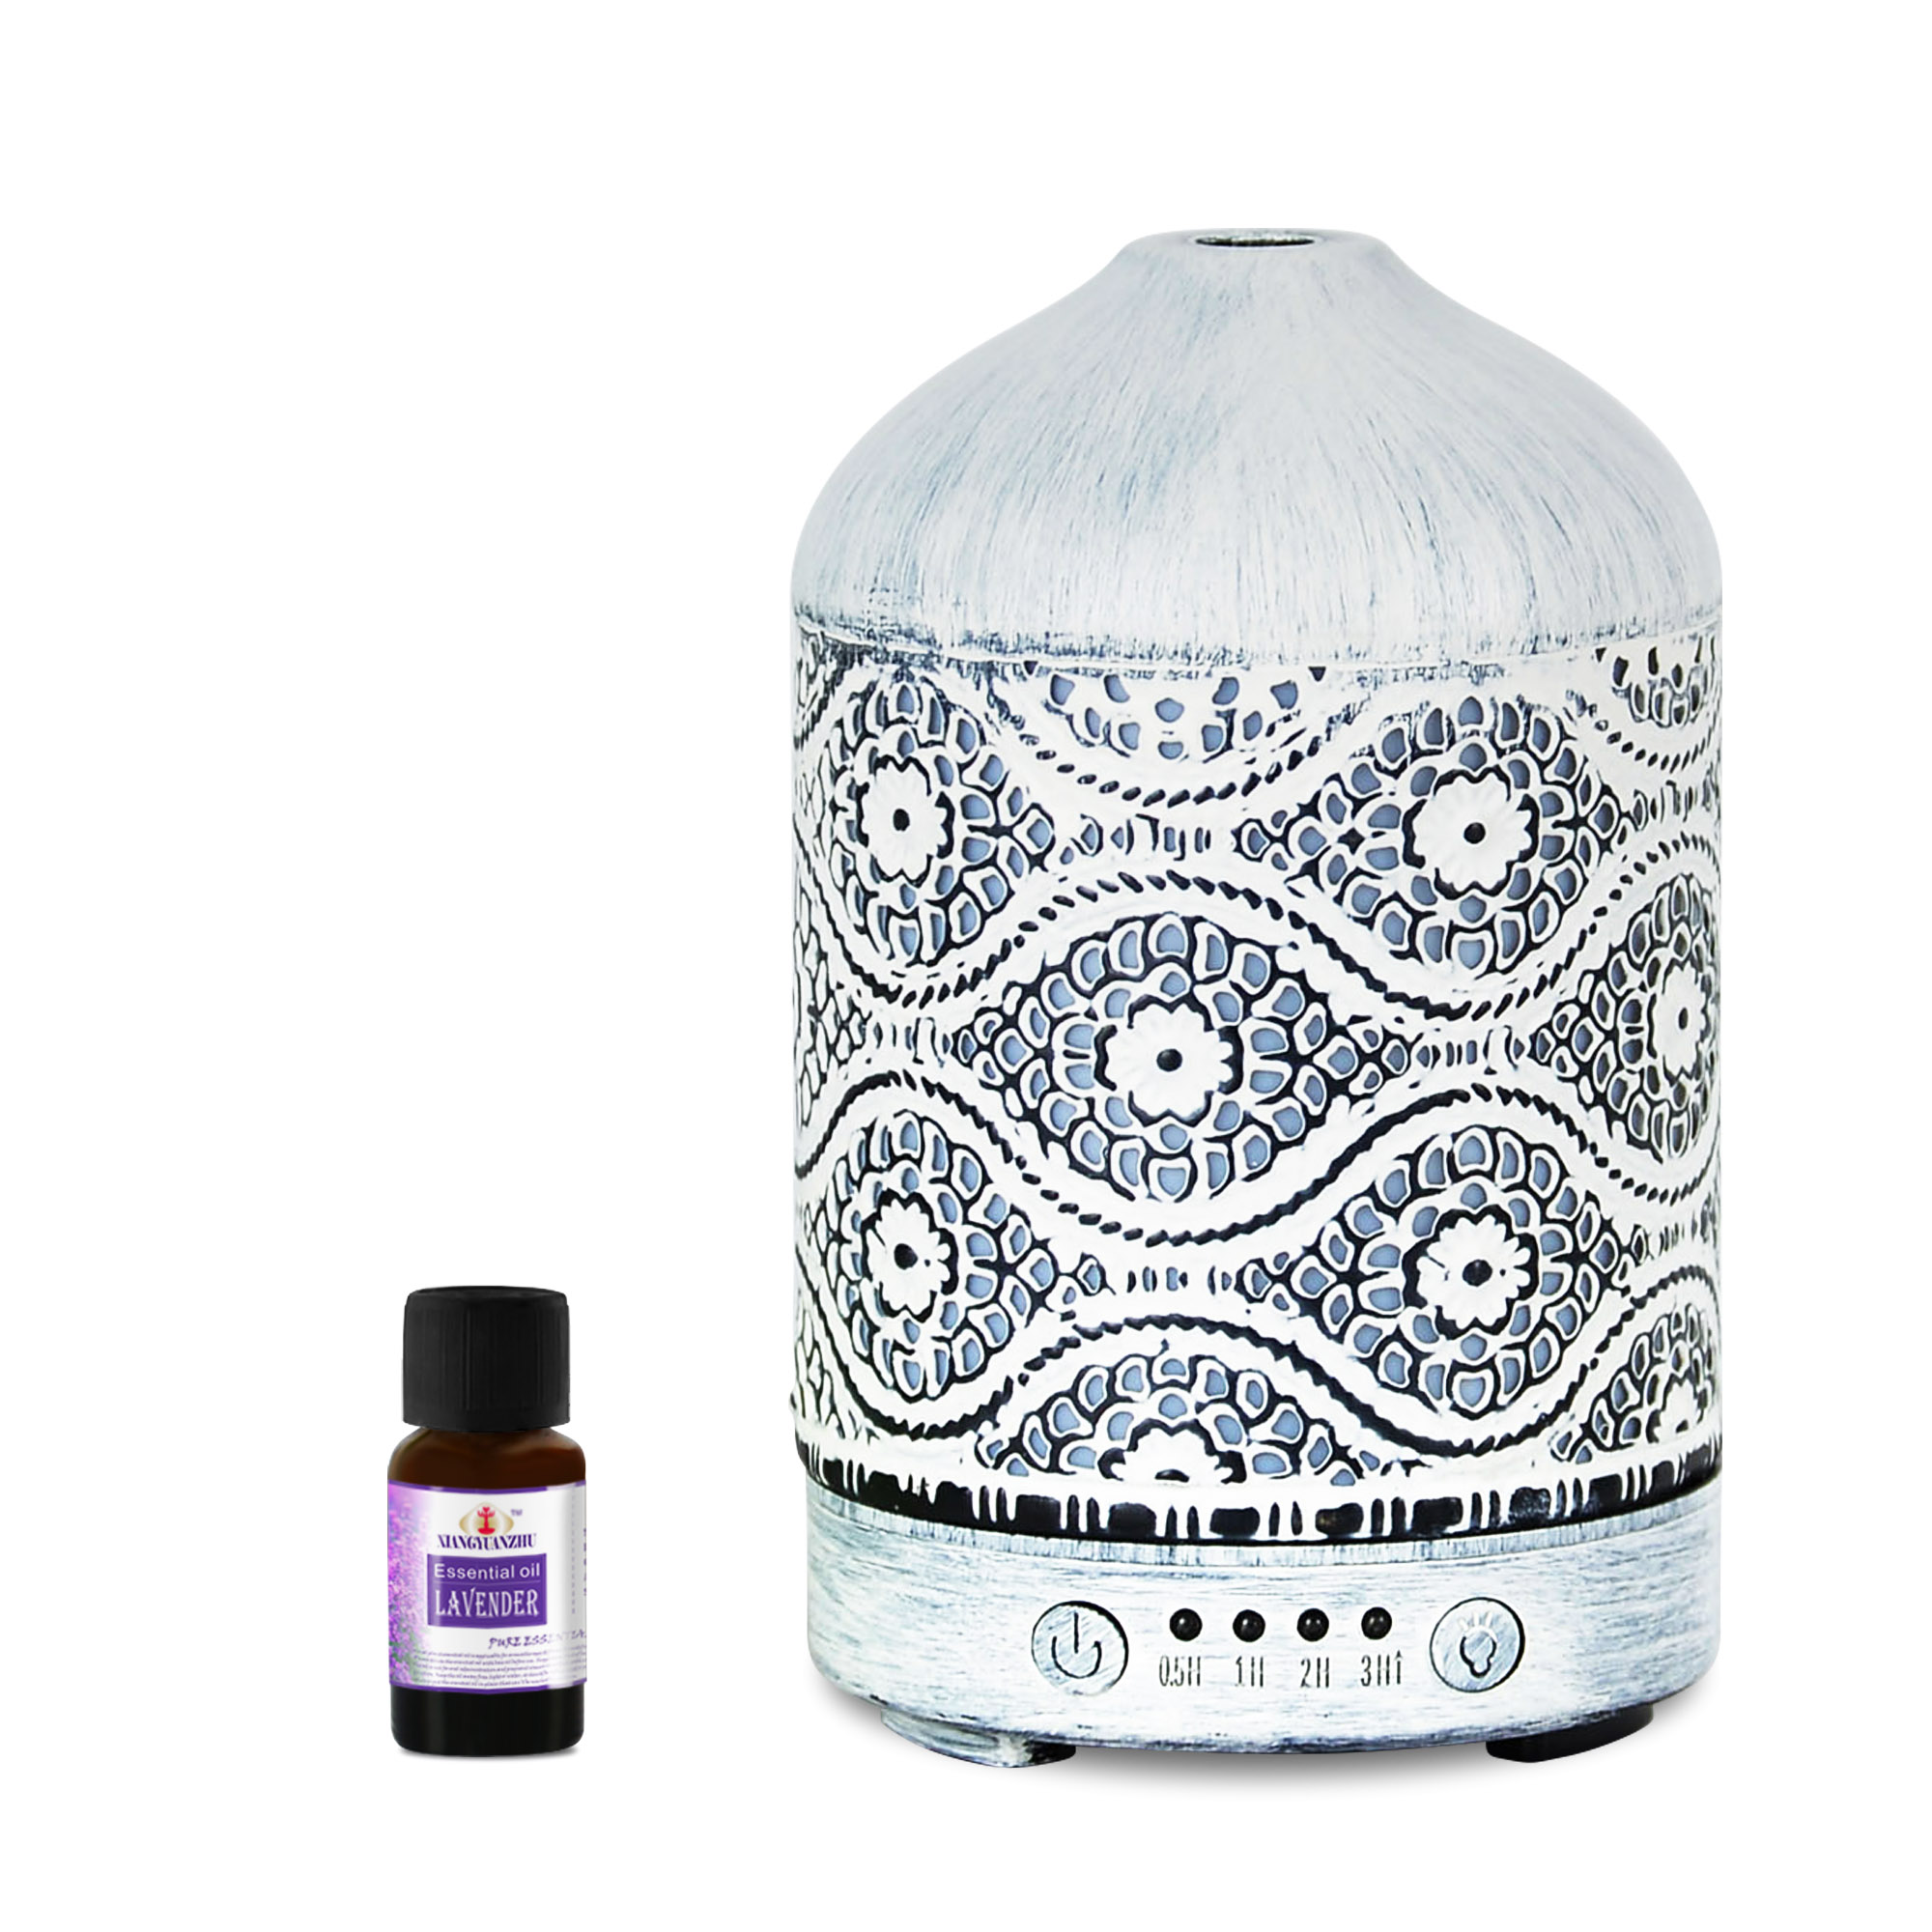 mbeat® activiva Metal Essential Oil and Aroma Diffuser-Vintage White -100ml